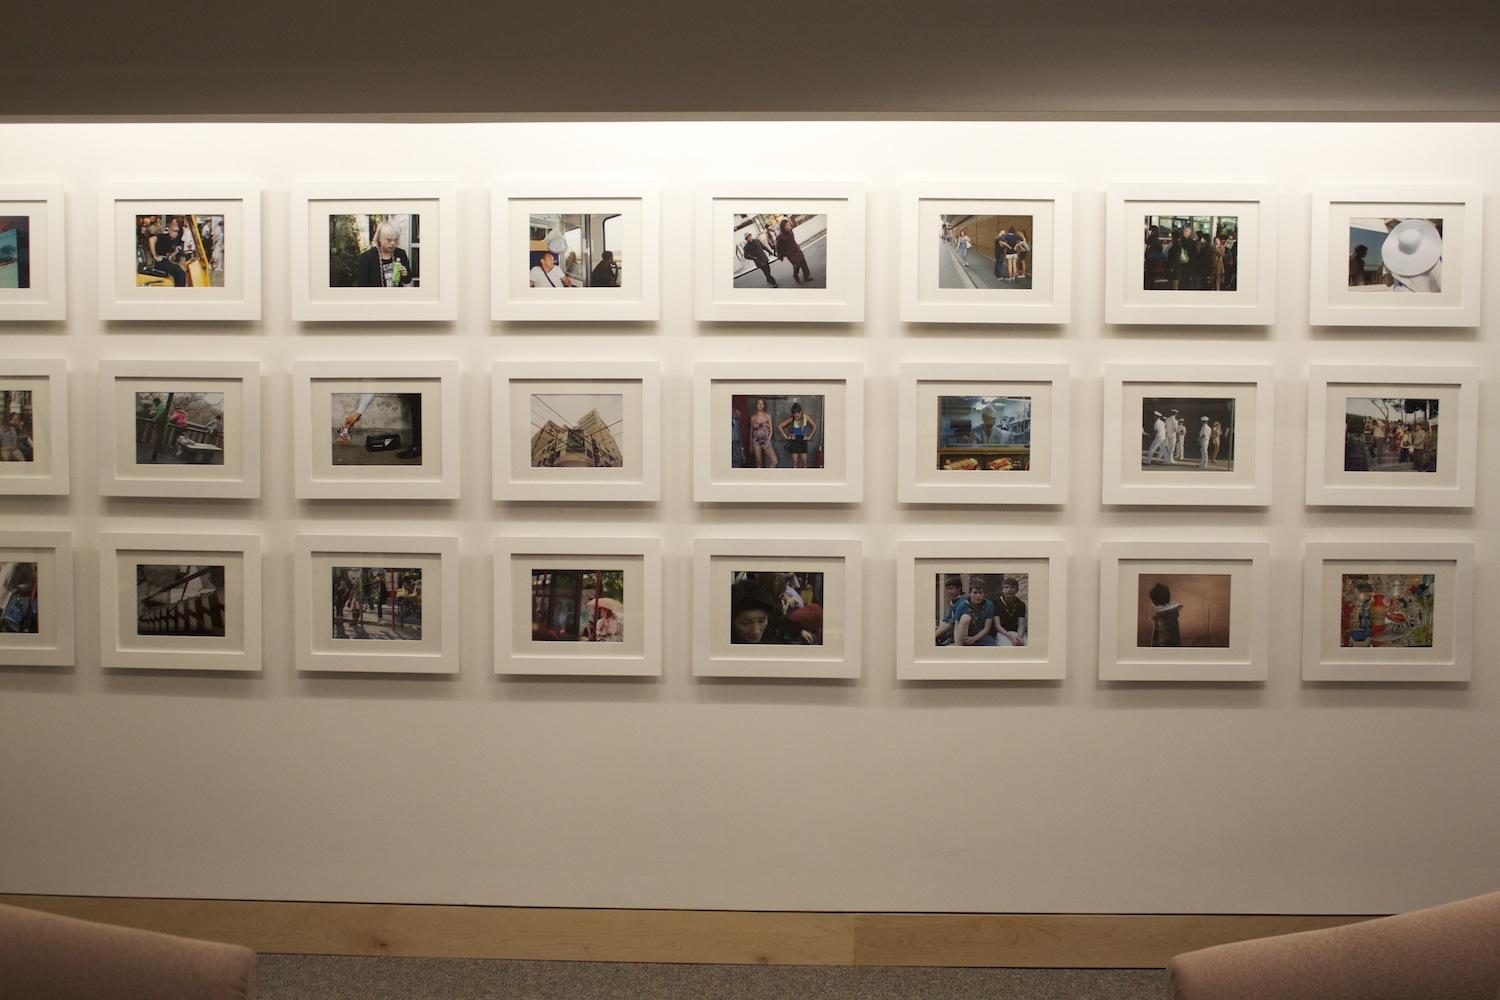 Hayden Hartnett’s Project Space is now on the second floor of the Leon Lowenstein building in the Office of Undergraduate Admissions. The space features a past student’s photographs in a three row lay out on the main wall. (Sara Azoulay/The Observer)